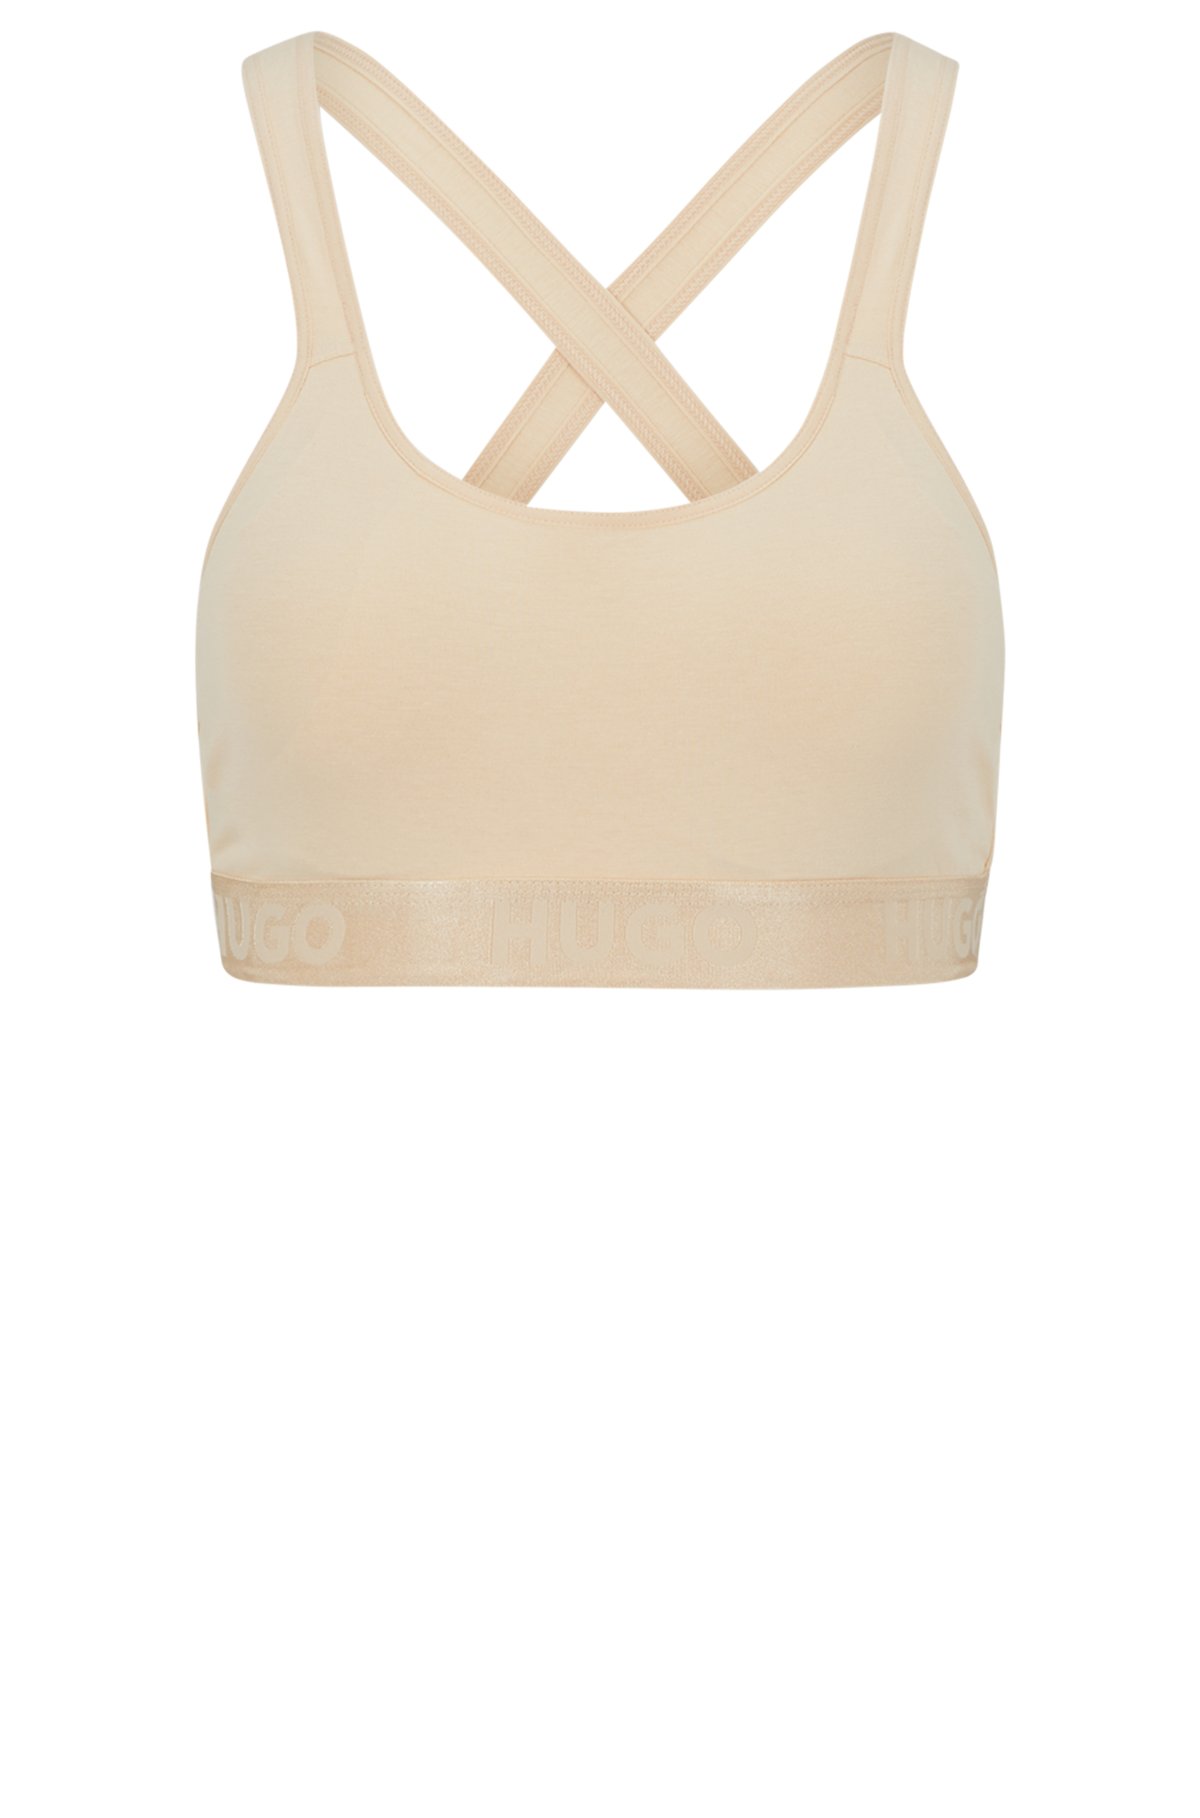 repeat stretch cotton - in with Bralette HUGO logos